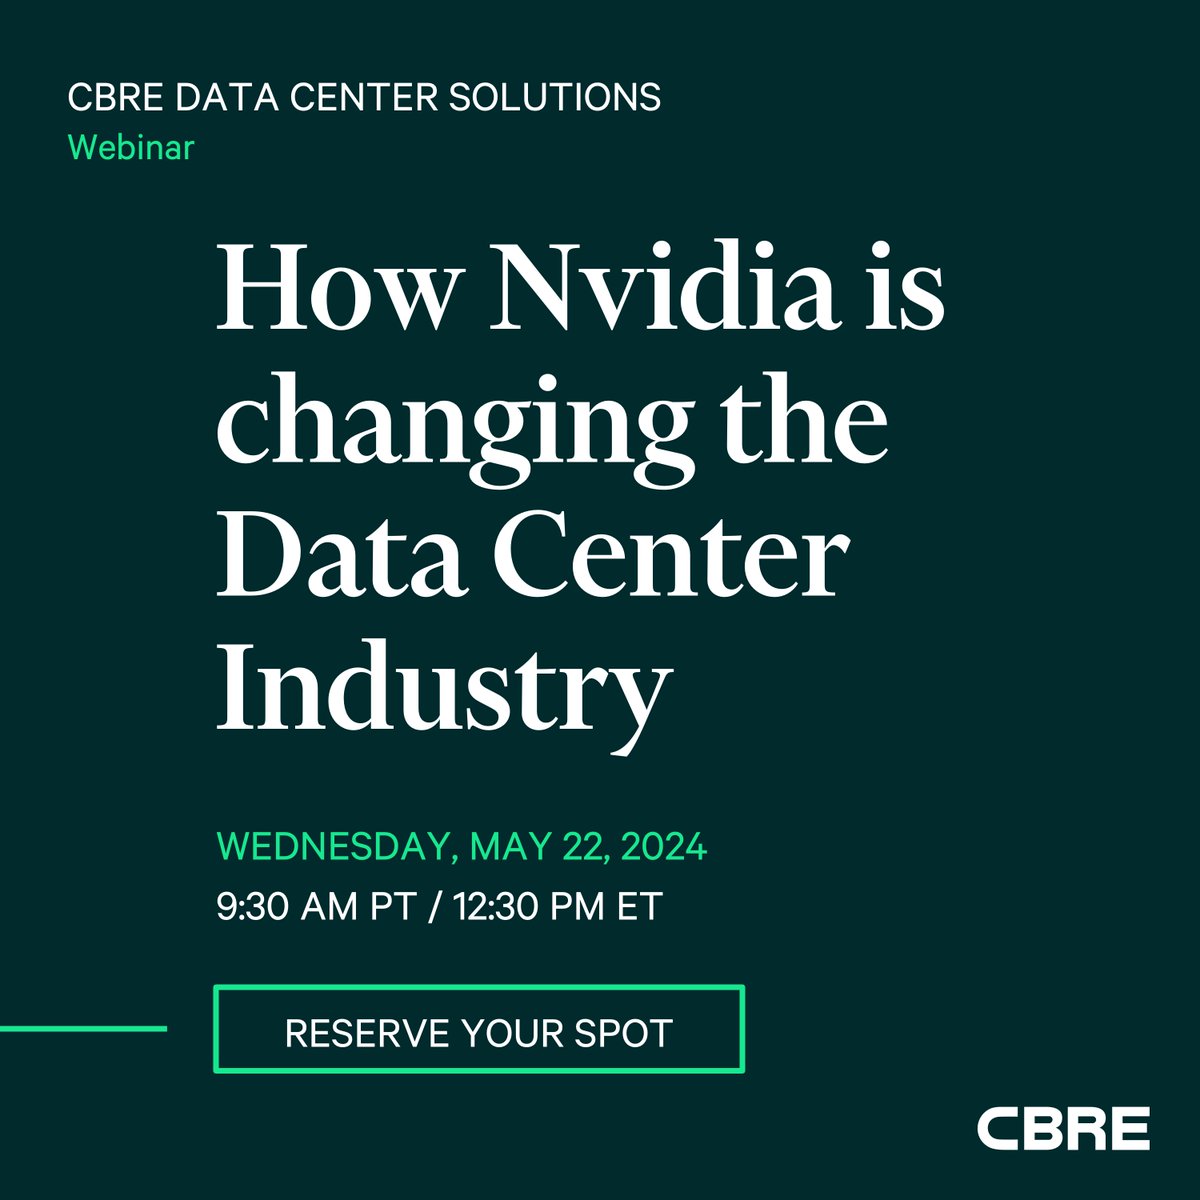 Join the #CBRE Data Center Solutions team on May 22nd for an engaging discussion on how @nvidia’s technology is changing the way #DataCenters are built and operated across the globe. Reserve your spot: cbre.co/3UtxWX0